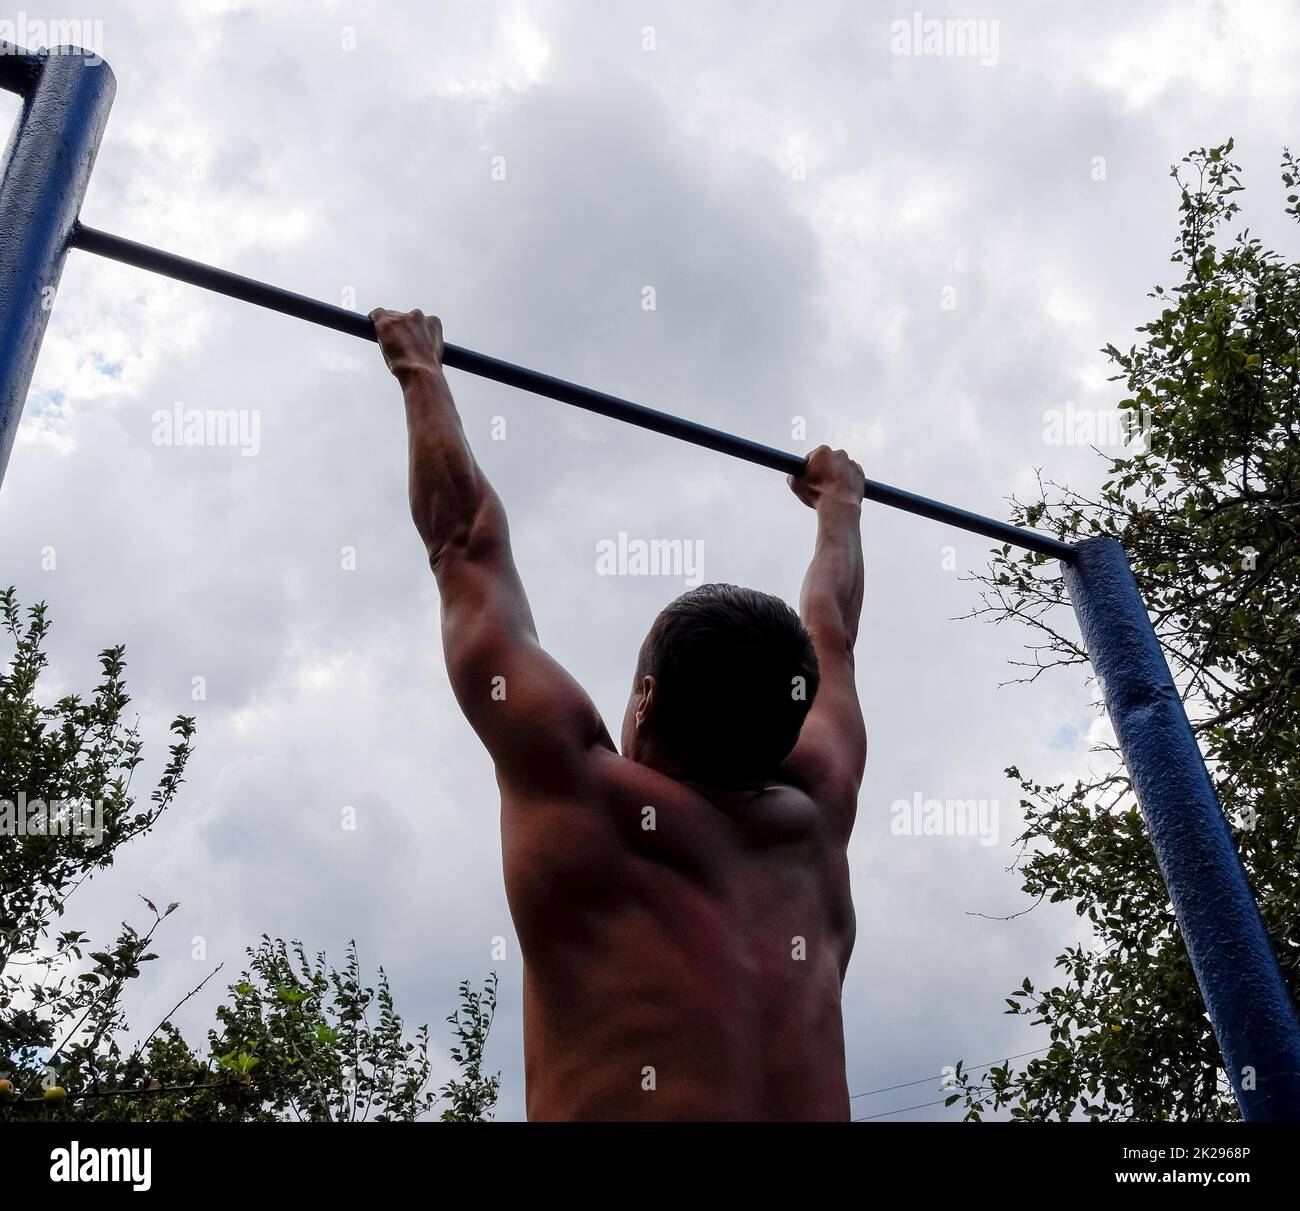 The man pulls himself up on the bar. Playing sports in the fresh air. Horizontal bar. Stock Photo